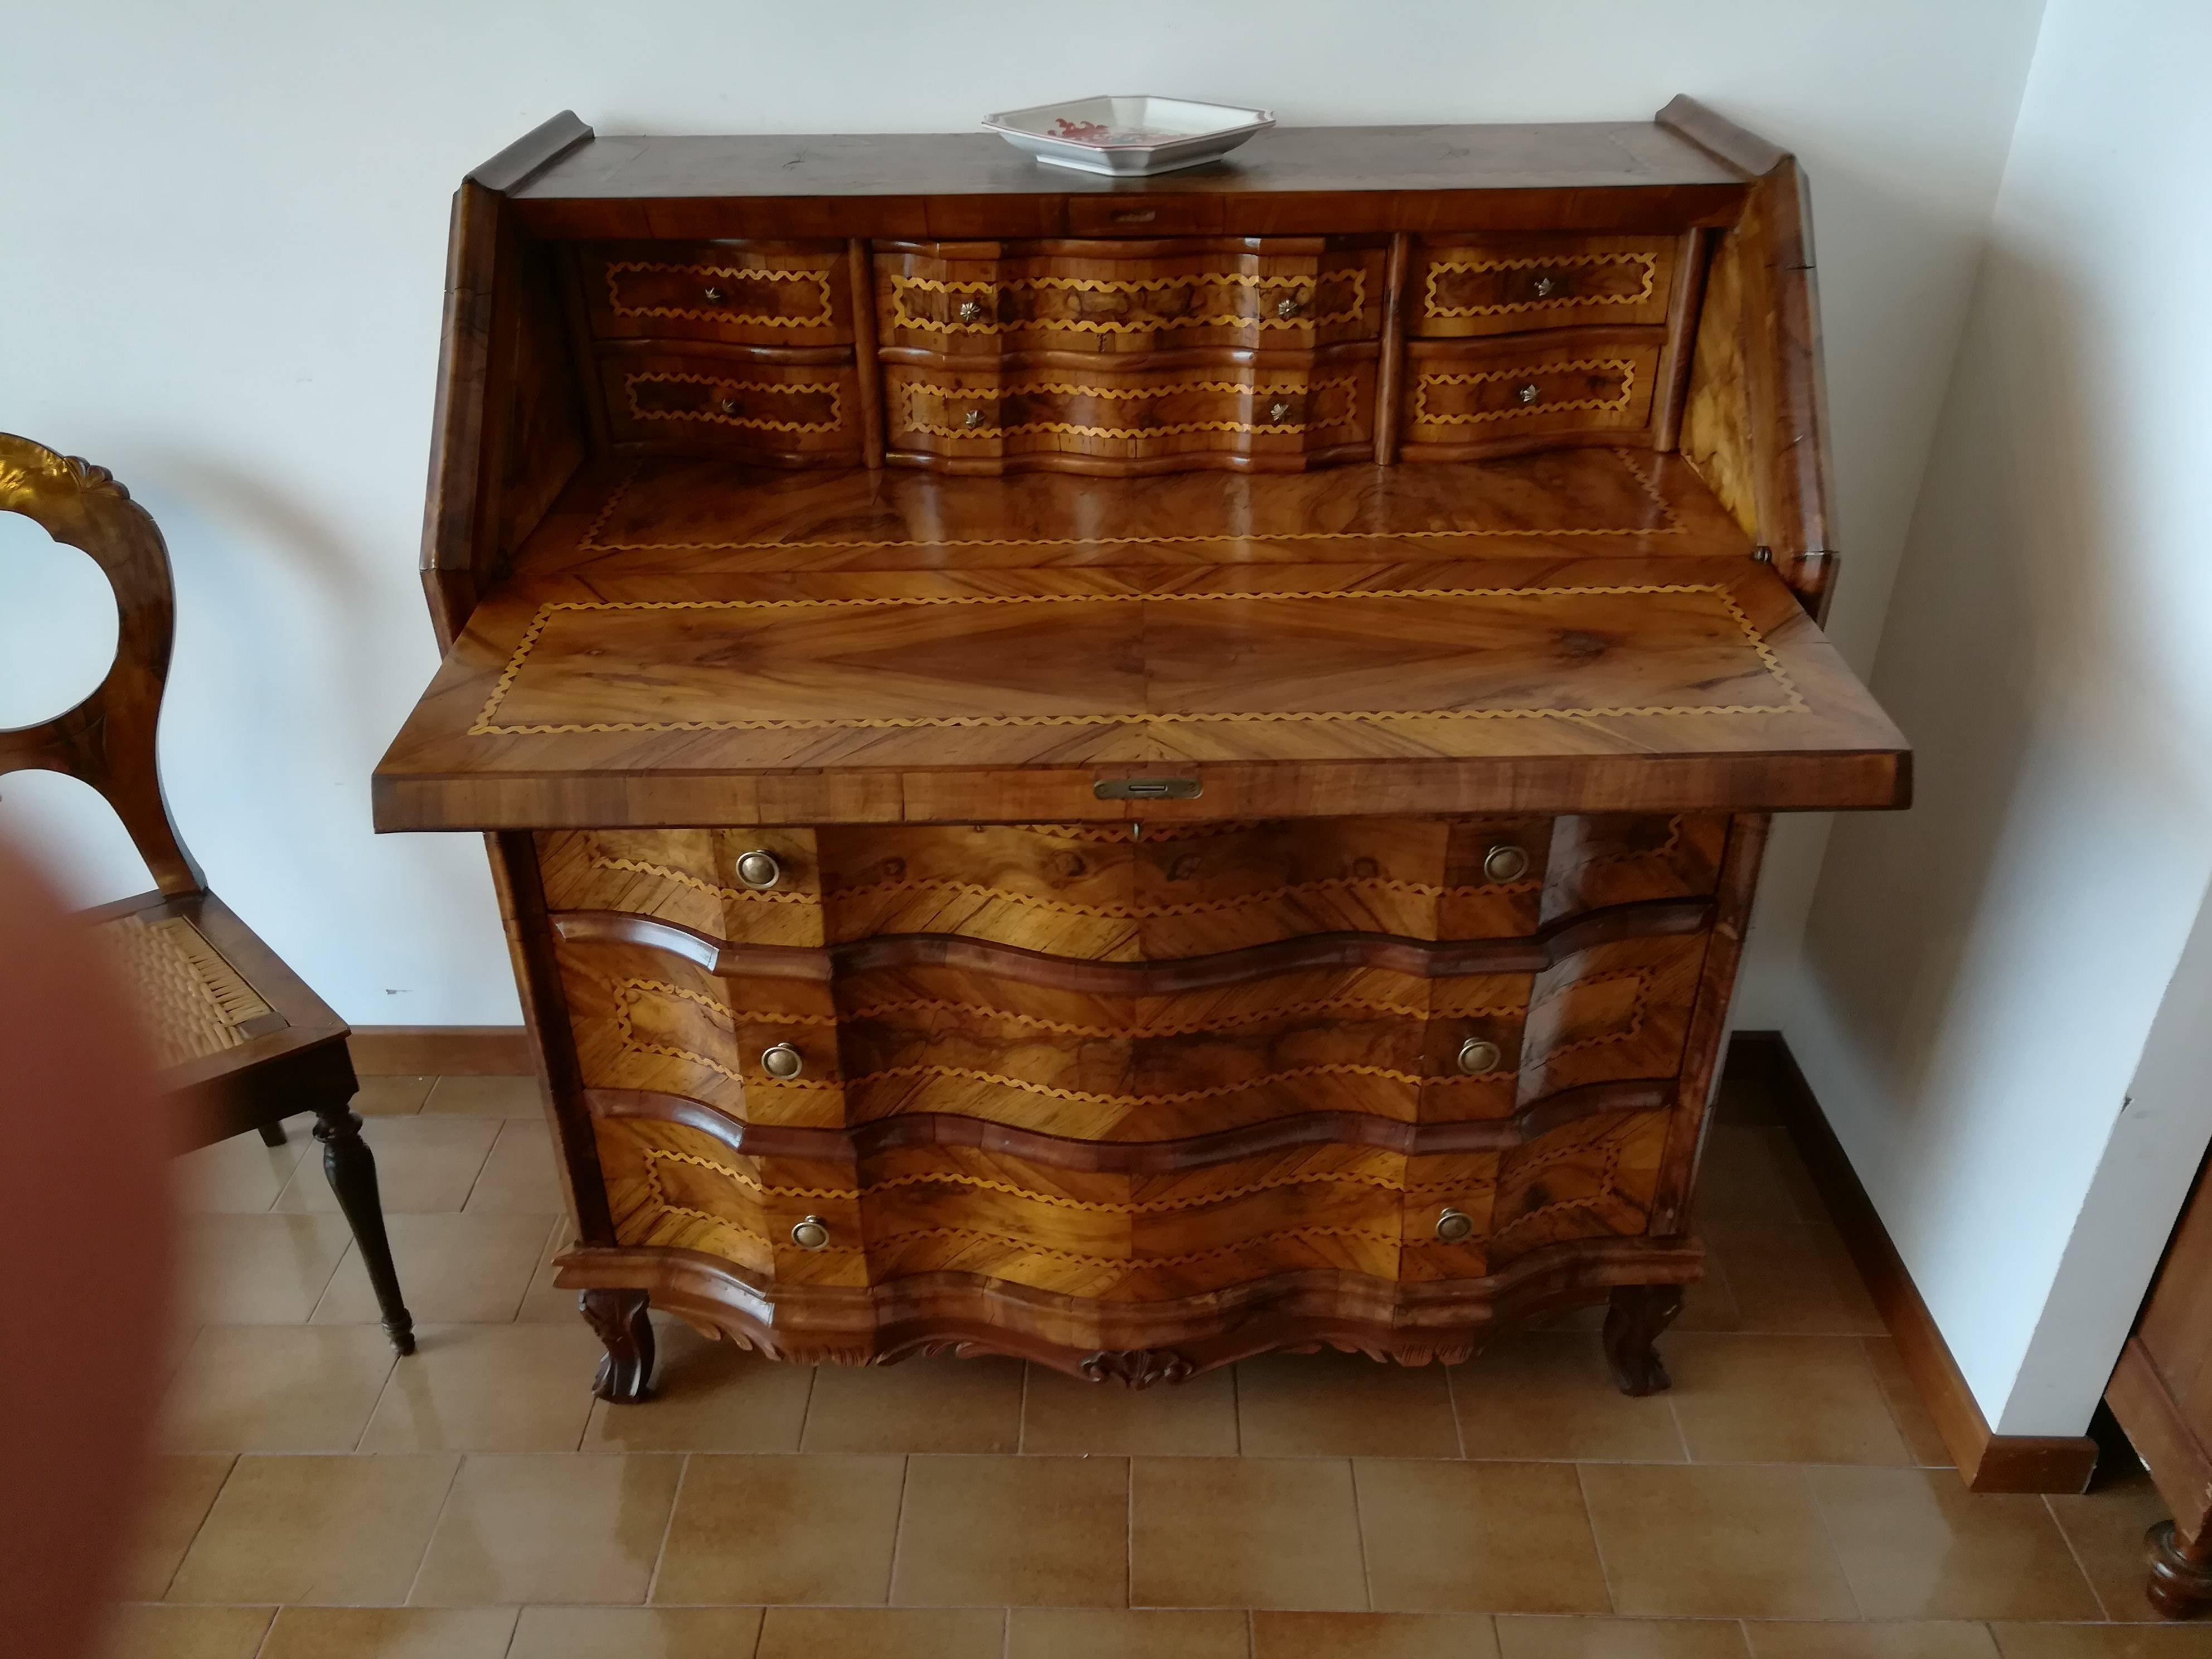 This elegant burau was made near Venice in the begin of 20th Century.It has many secrets and it is restored